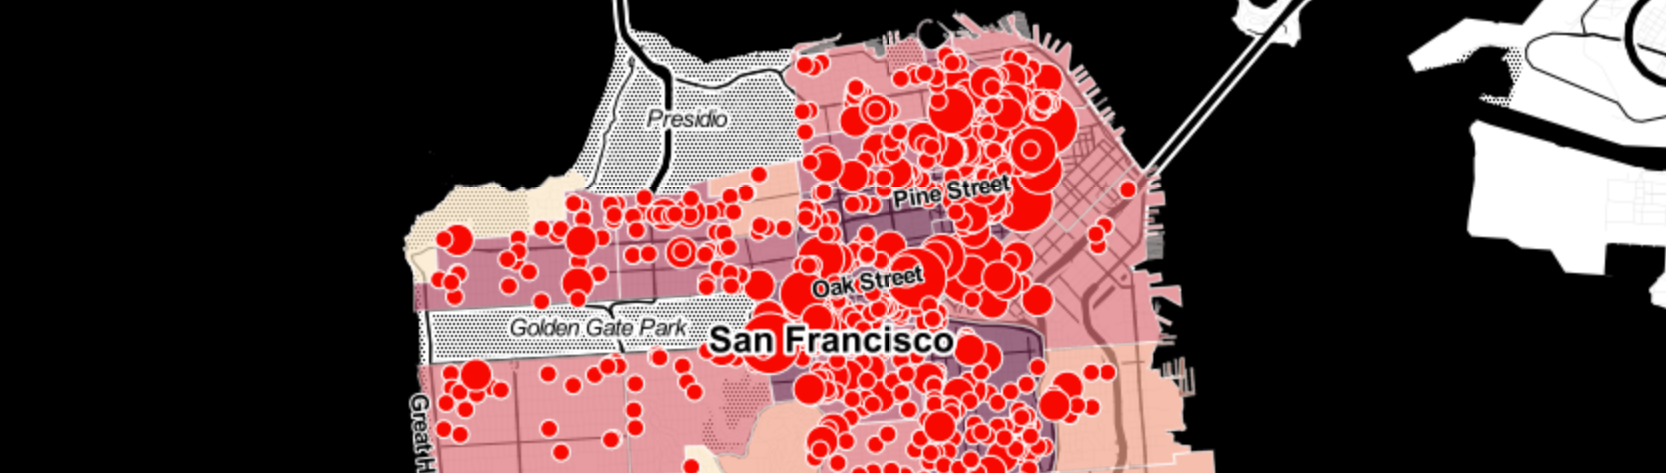 Captial Improvement Evictions (1997-2019), San Francisco, Anti-Eviction Mapping Project